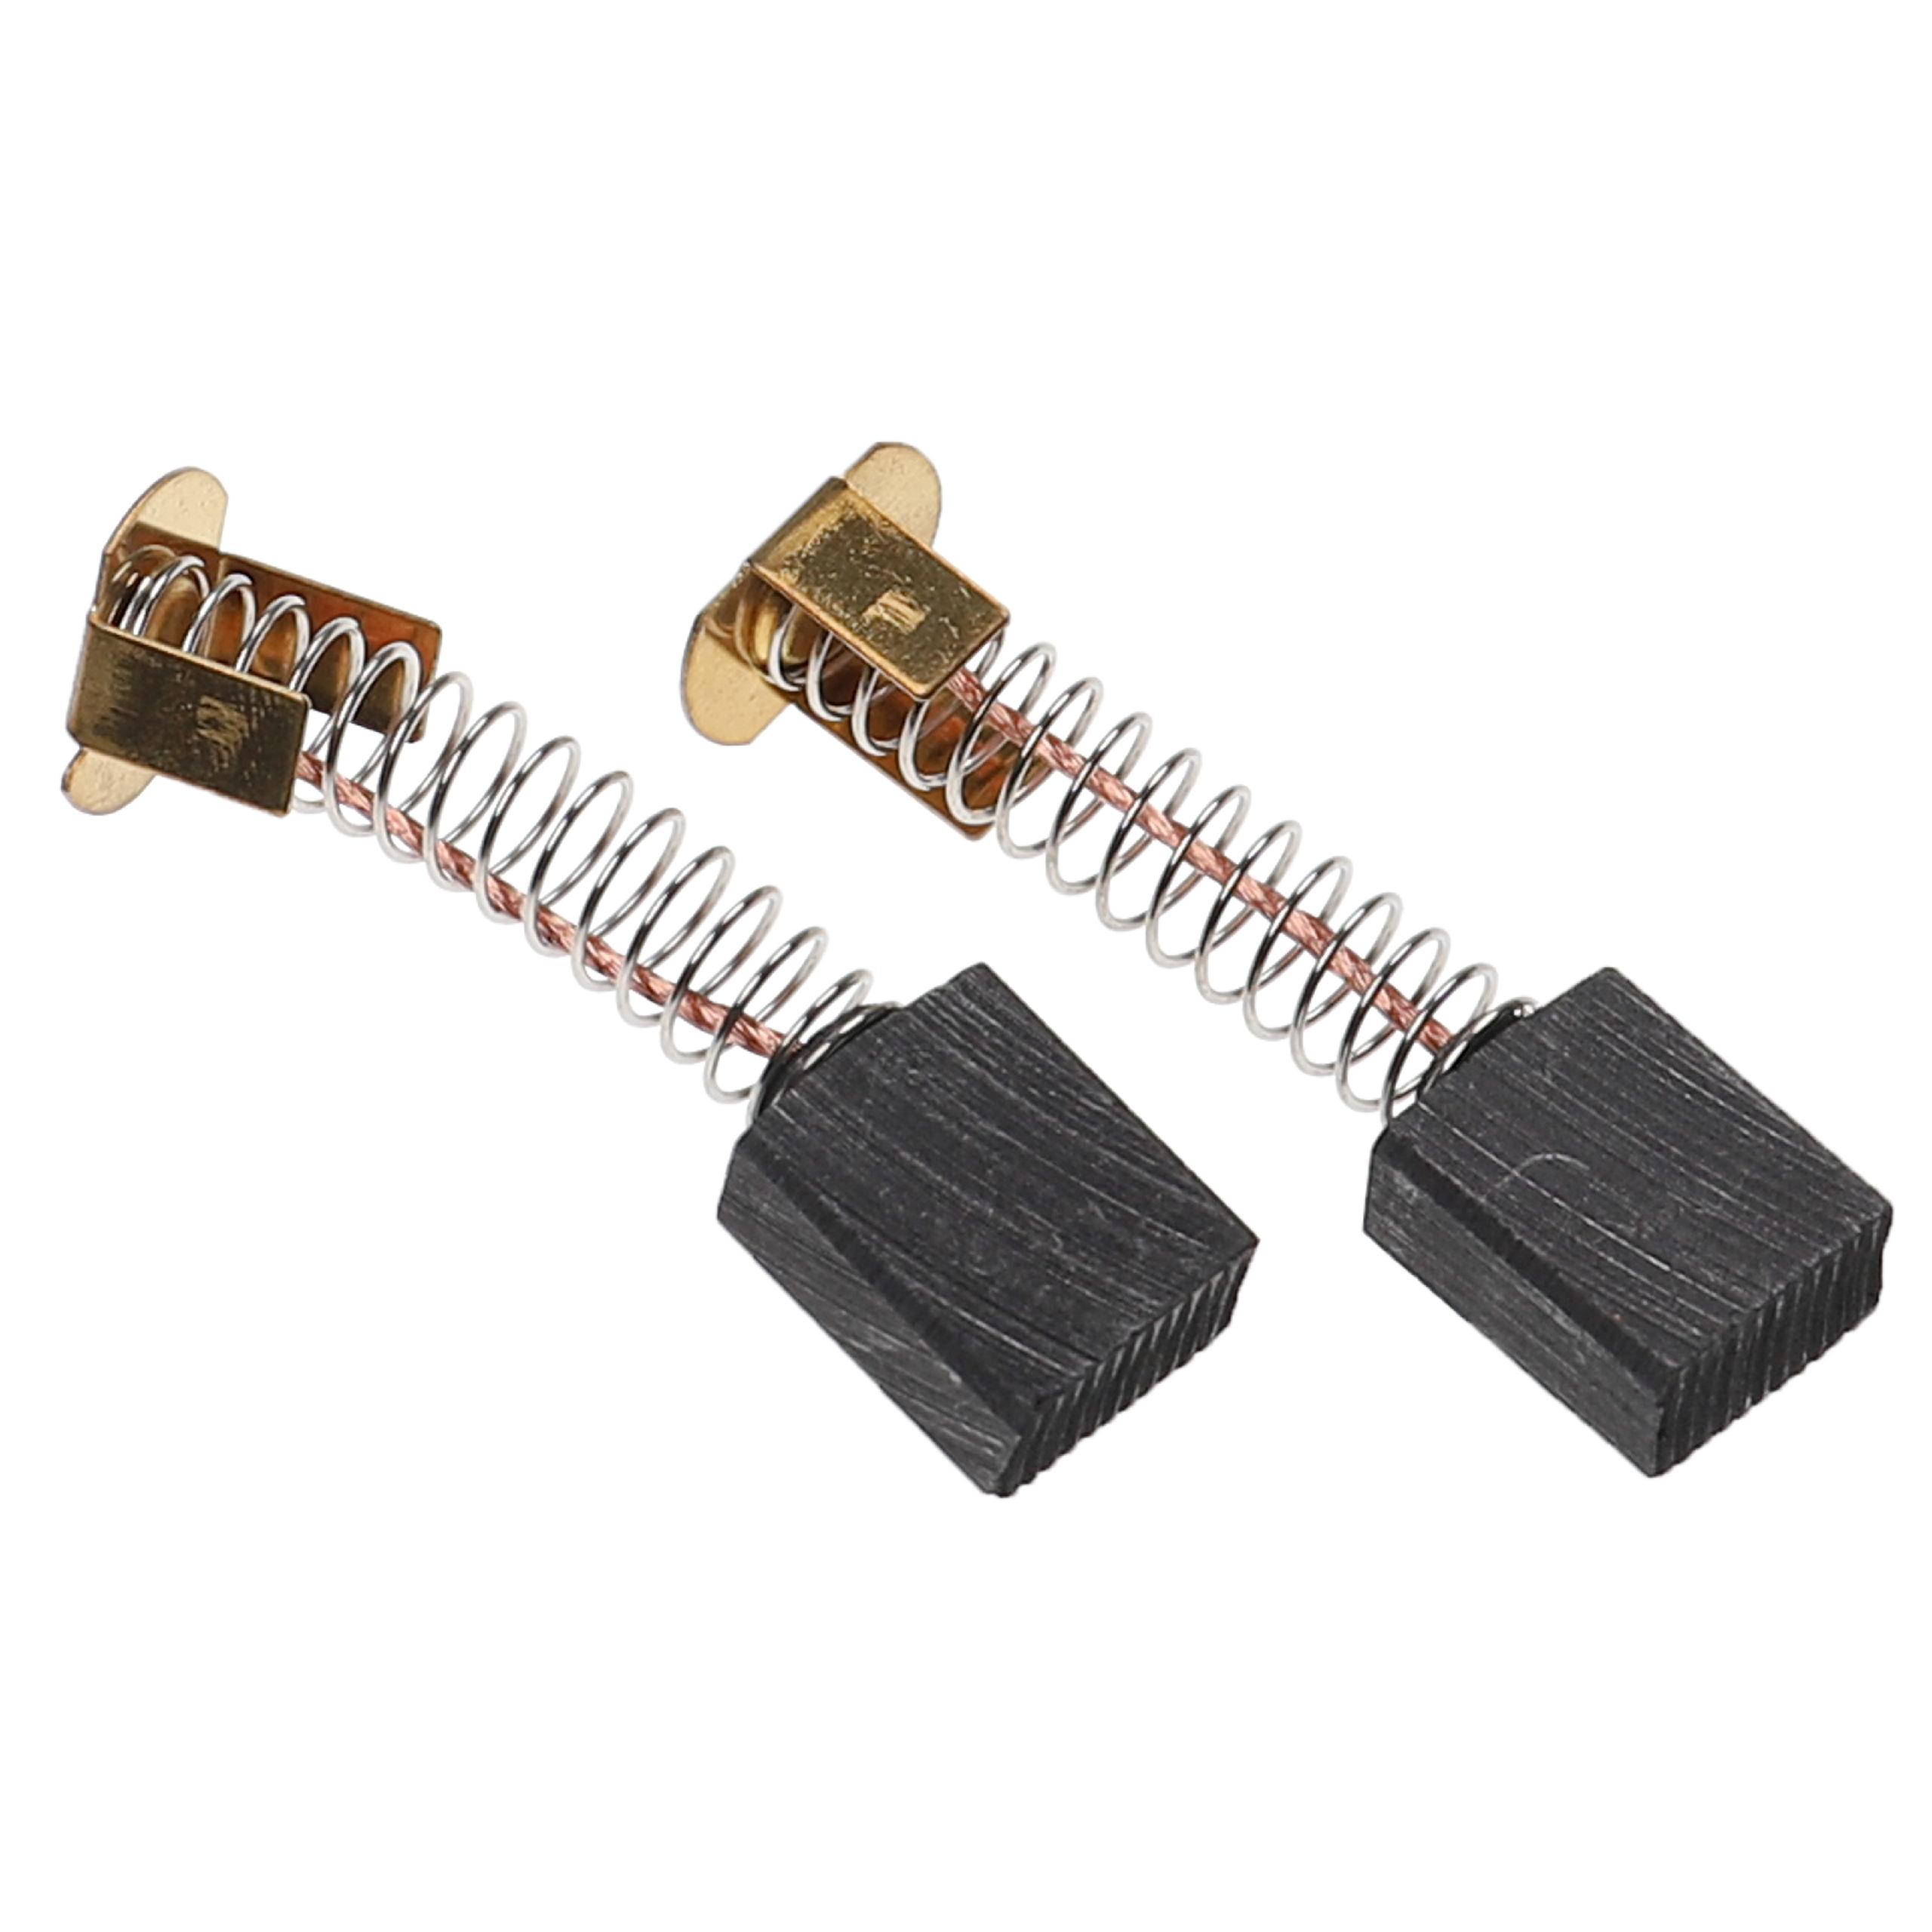 2x Carbon Brush as Replacement for Hitachi 999-036 Electric Power Tools + Spring, 7 x 13 x 17mm